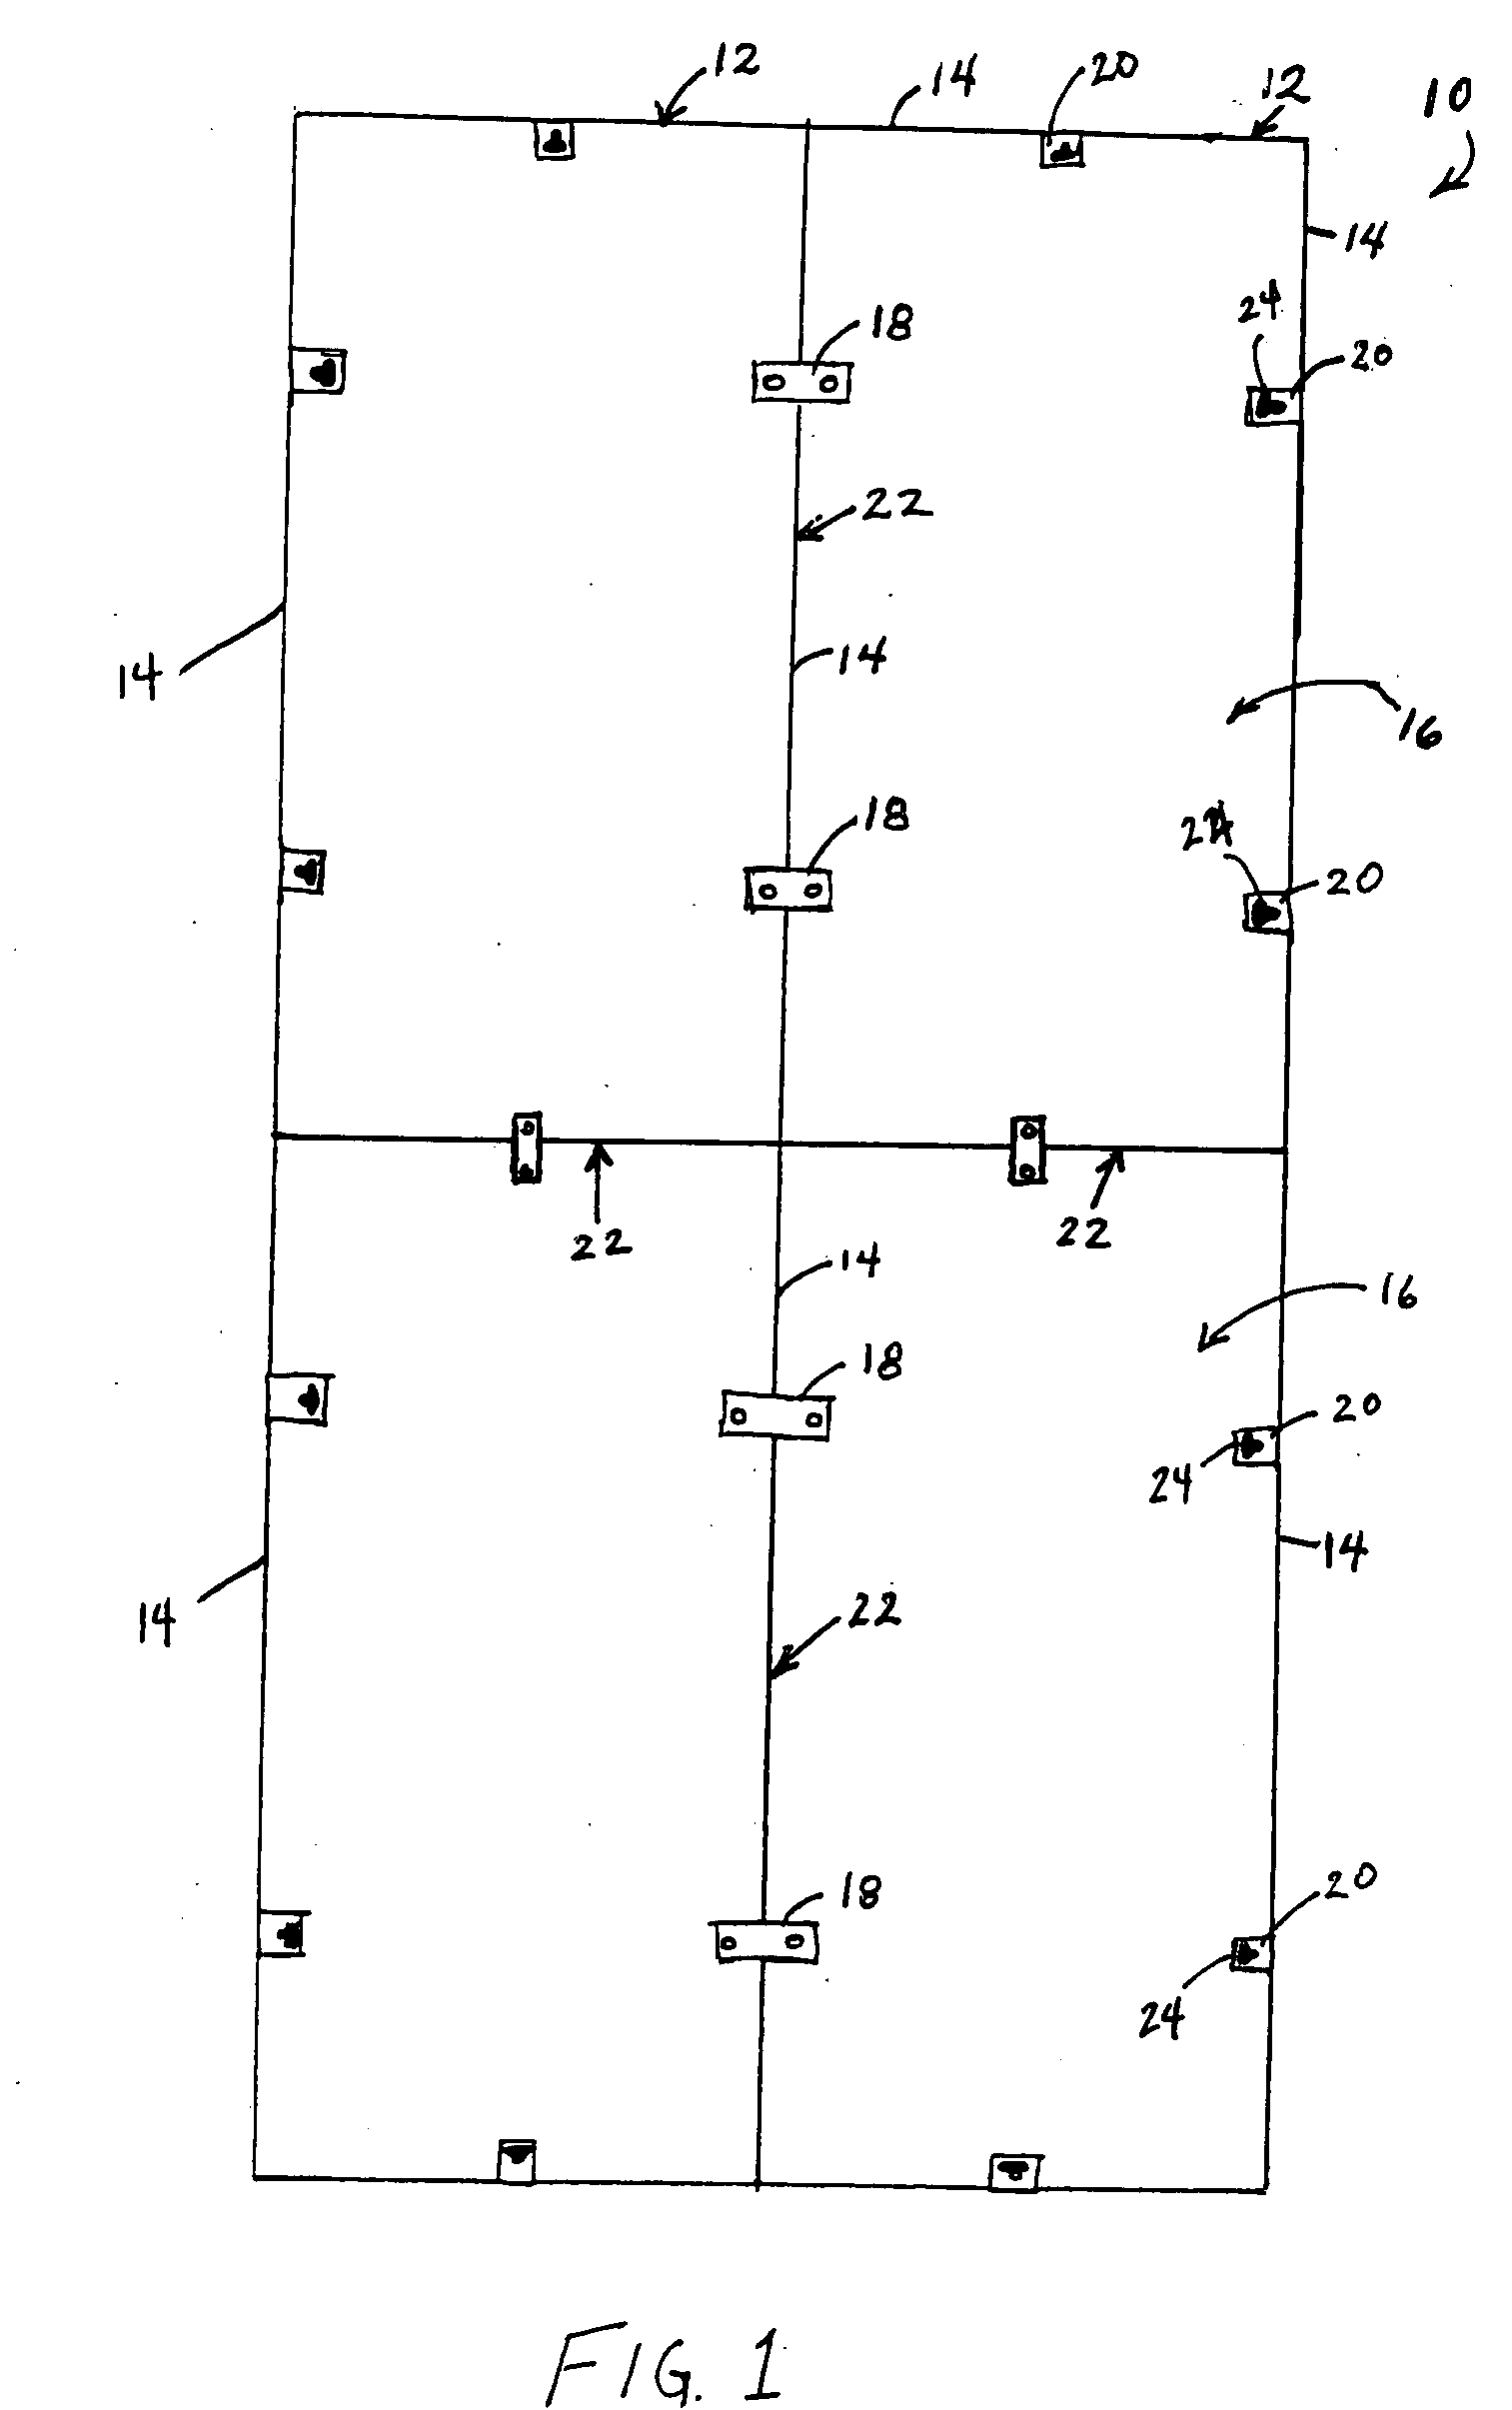 Attachment system for a modular flooring assembly